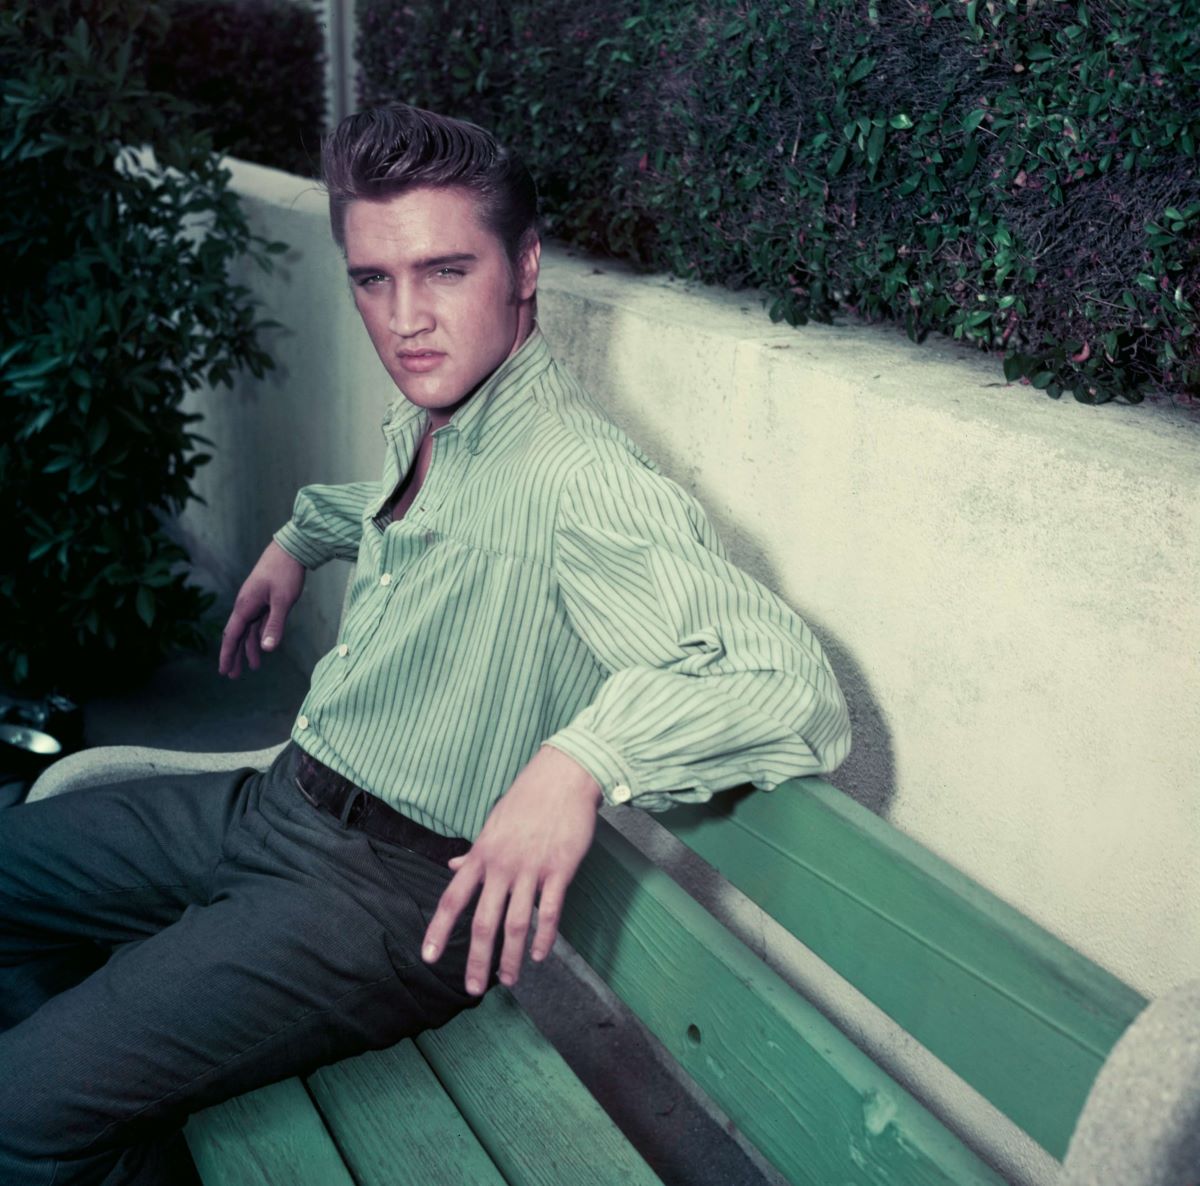 Elvis wears a green shirt and sits on a green bench.